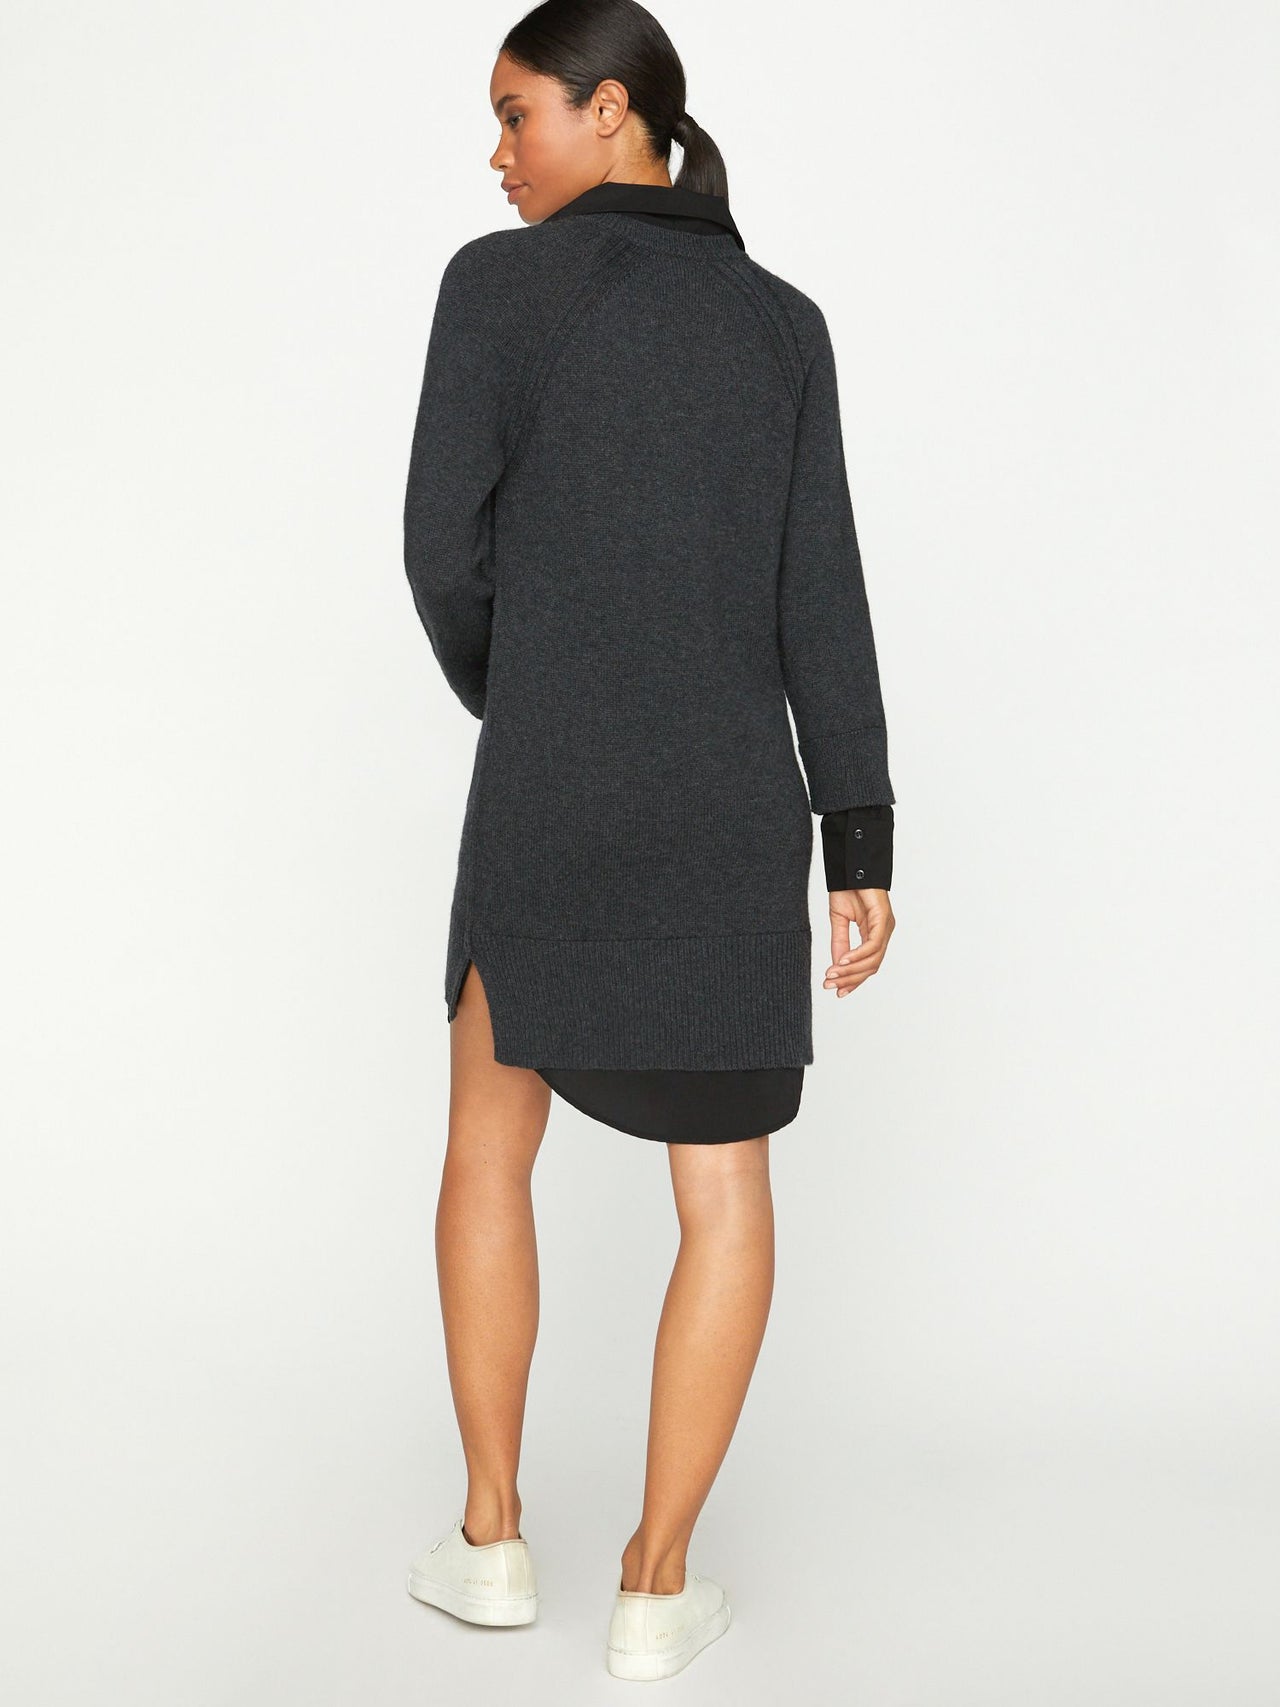 Women's Layered V-Neck Sweater Dress in Charcoal with Black Underlayer